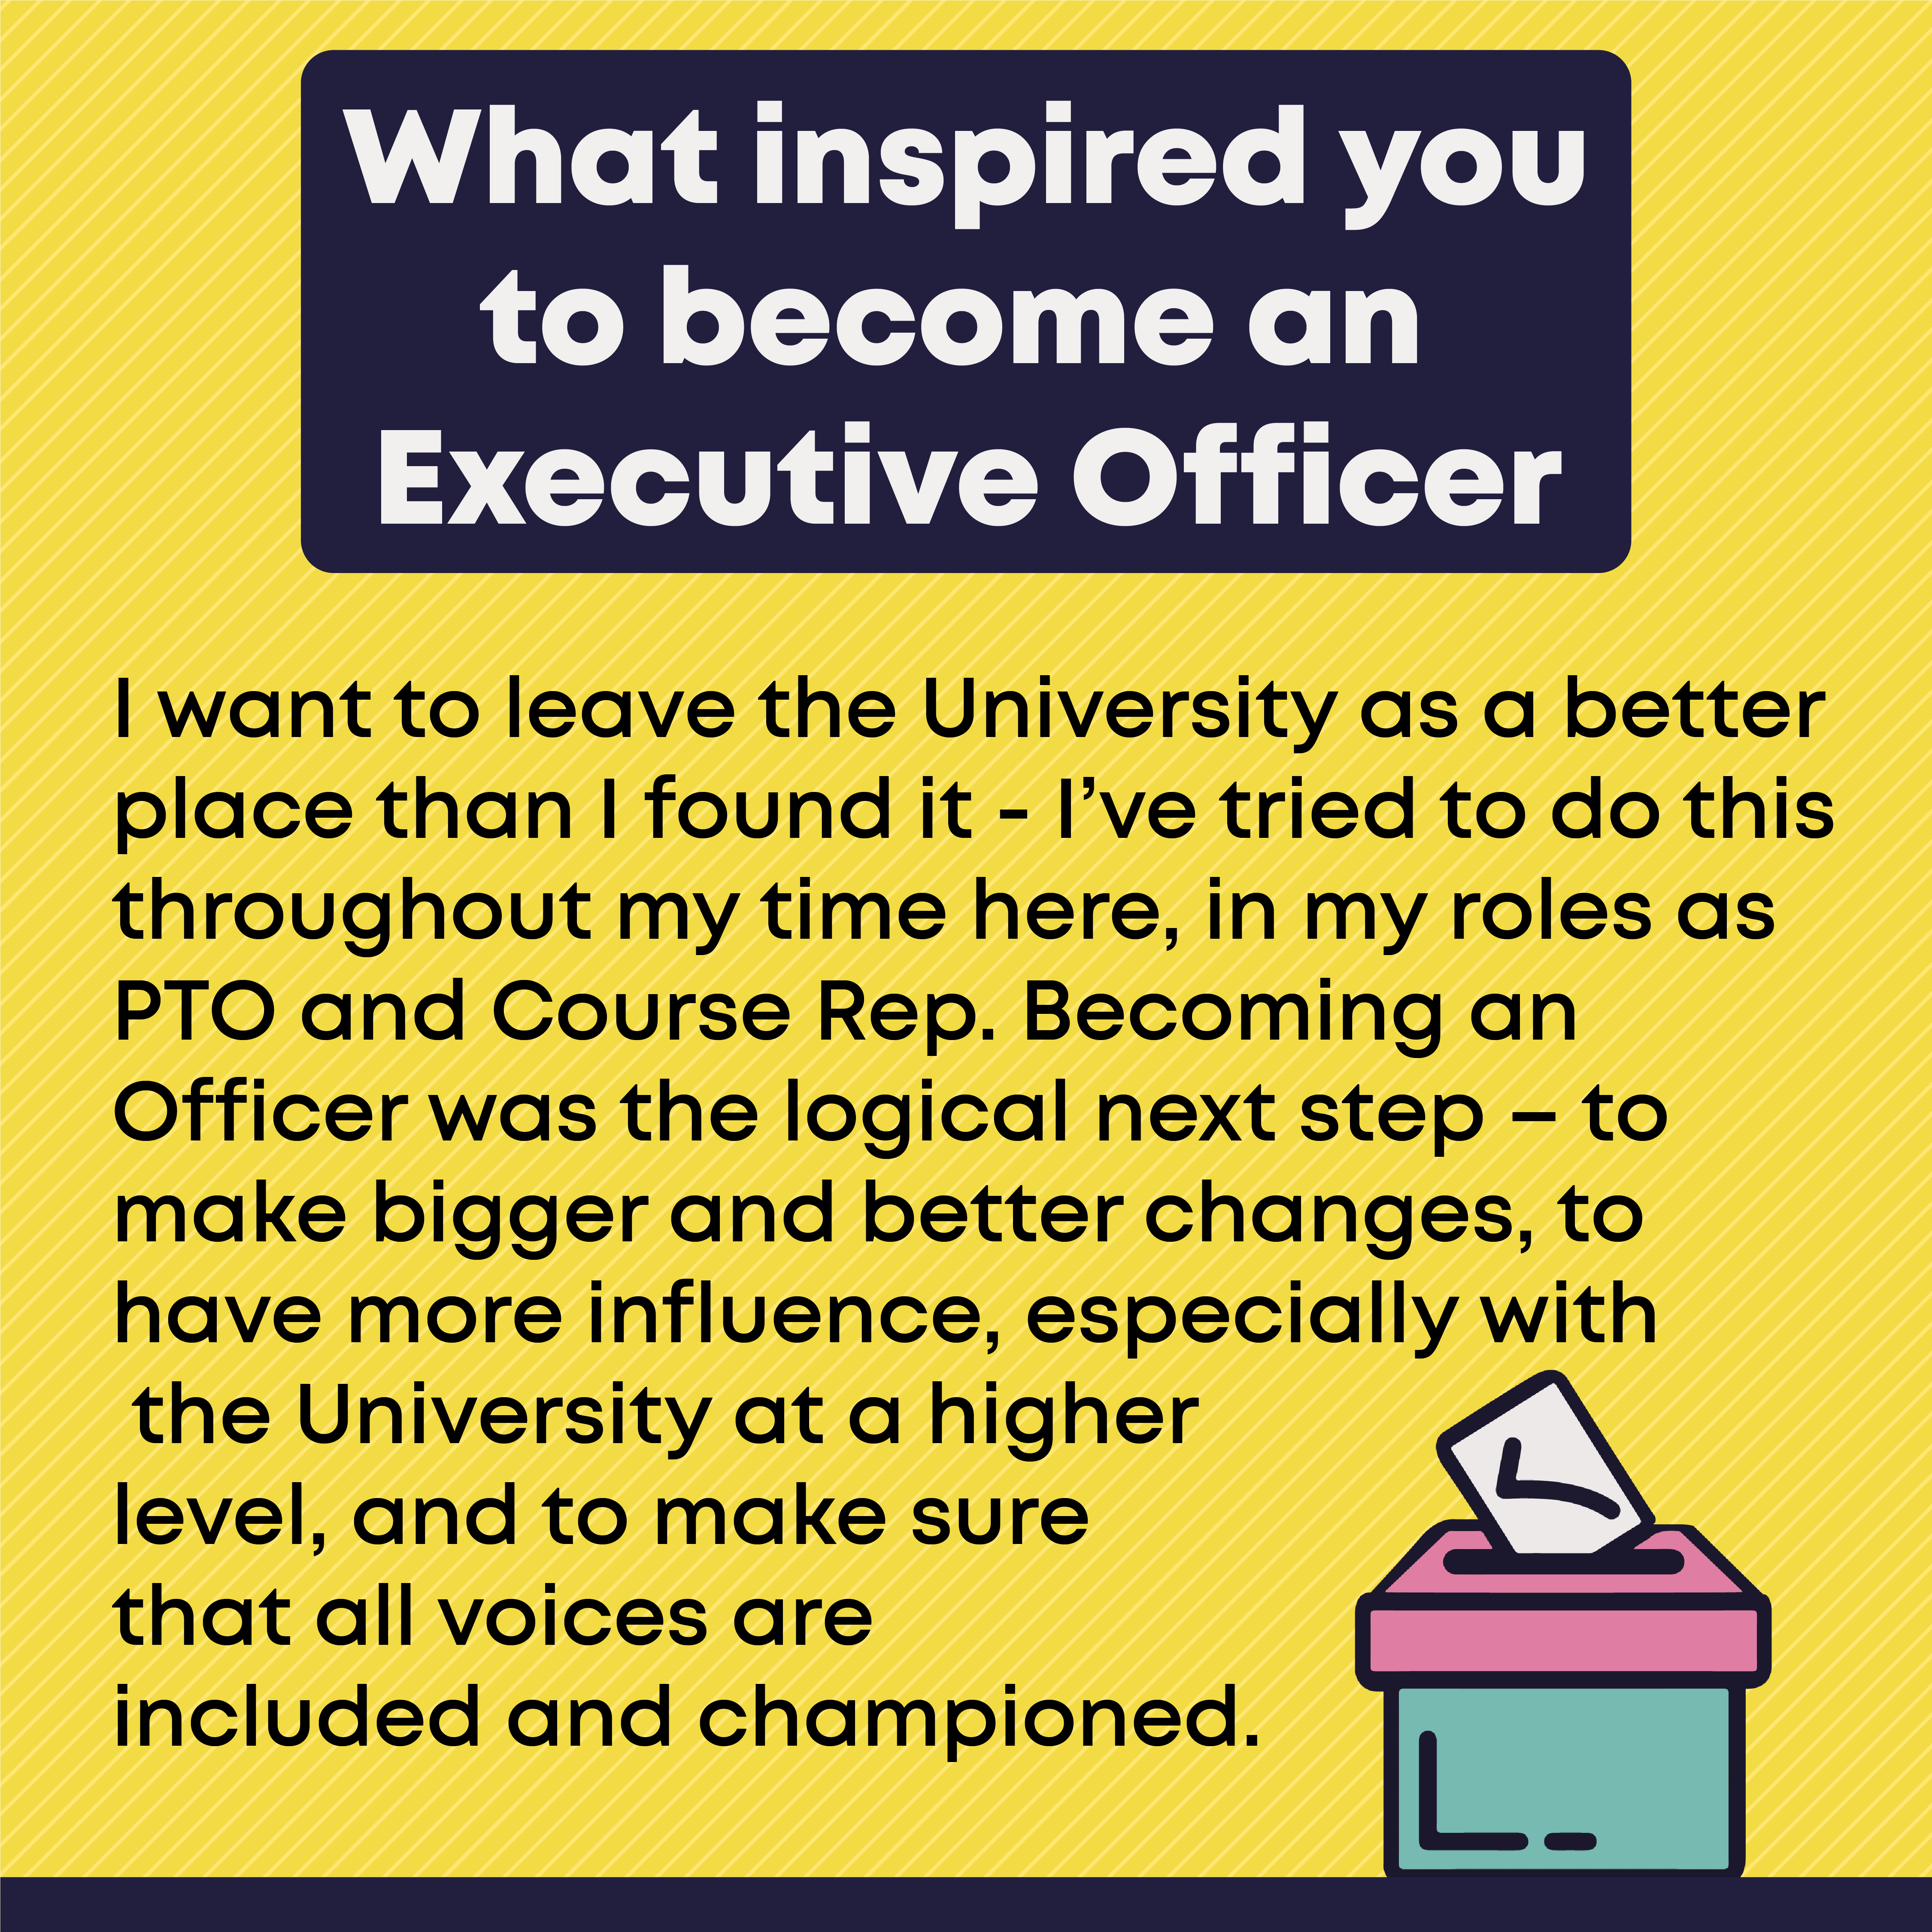 2.	What inspired you to become an Executive Officer? I want to leave the University as a better place than I found it - I’ve tried to do this throughout my time here, in my roles as PTO and Course Rep. Becoming an Officer was the logical next step – to make bigger and better changes, to have more influence, especially with the University at a higher level, and to make sure that all voices are included and championed. 